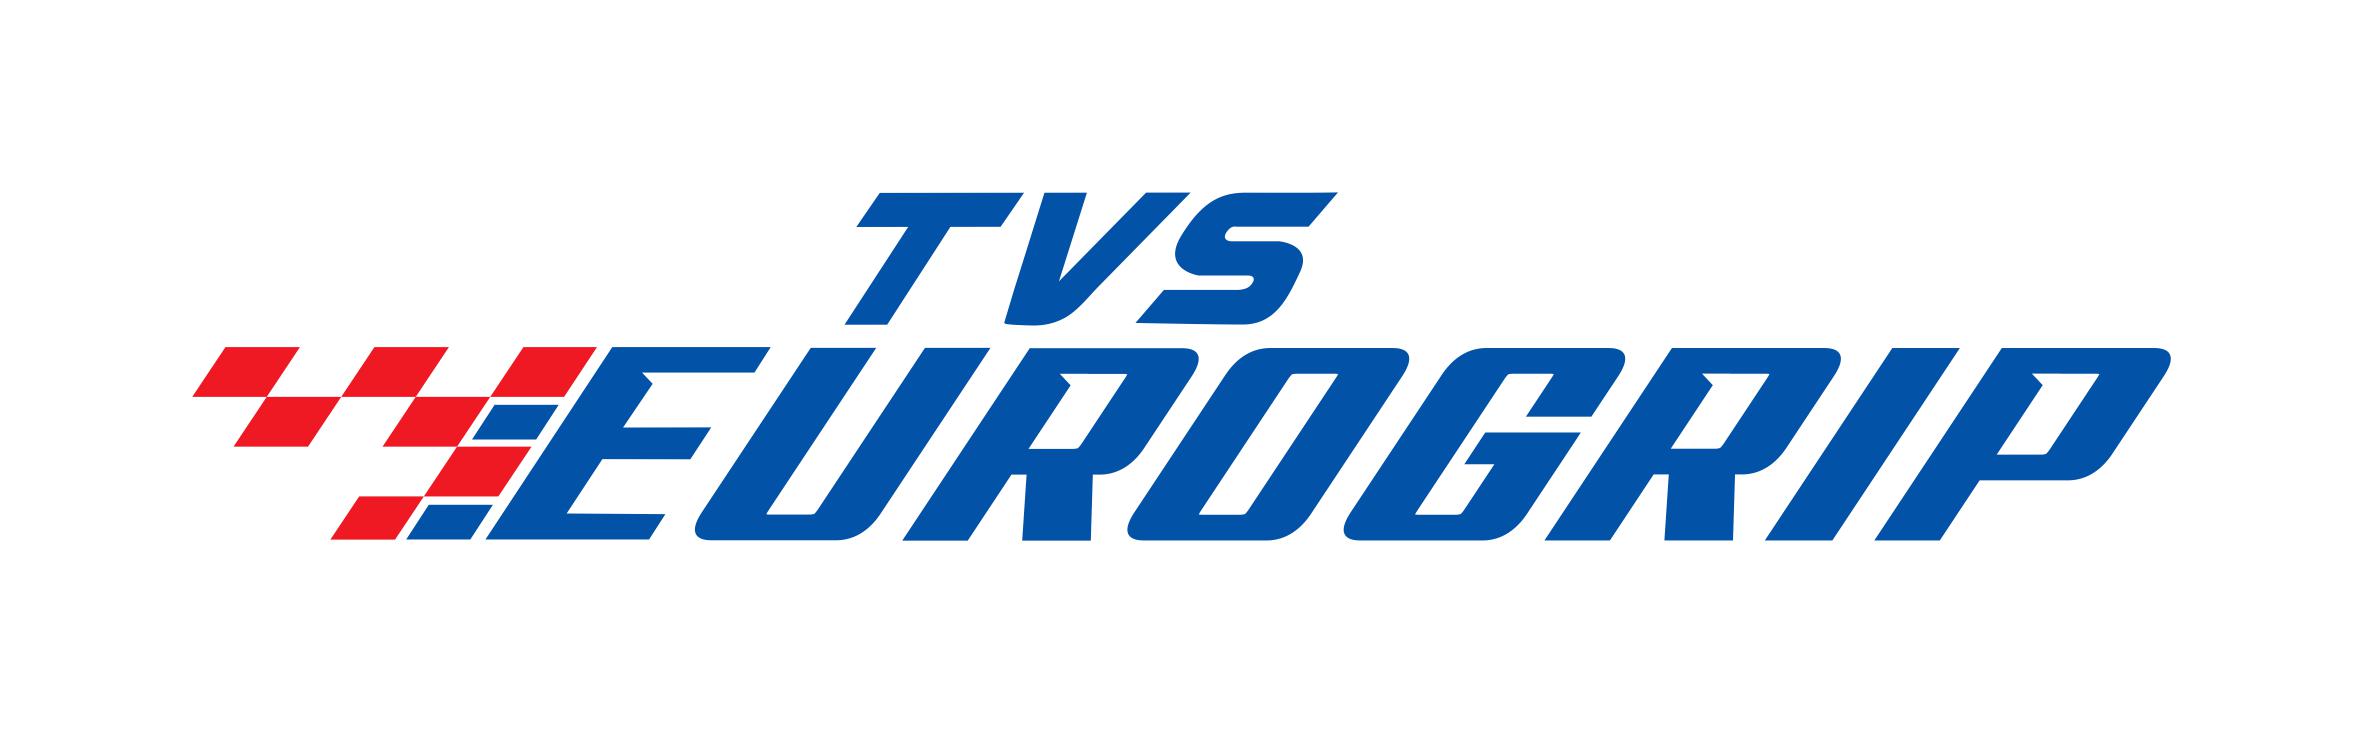 TVS EUROGRIP CELEBRATES INDEPENDENCE DAY WITH A DIFFERENCE